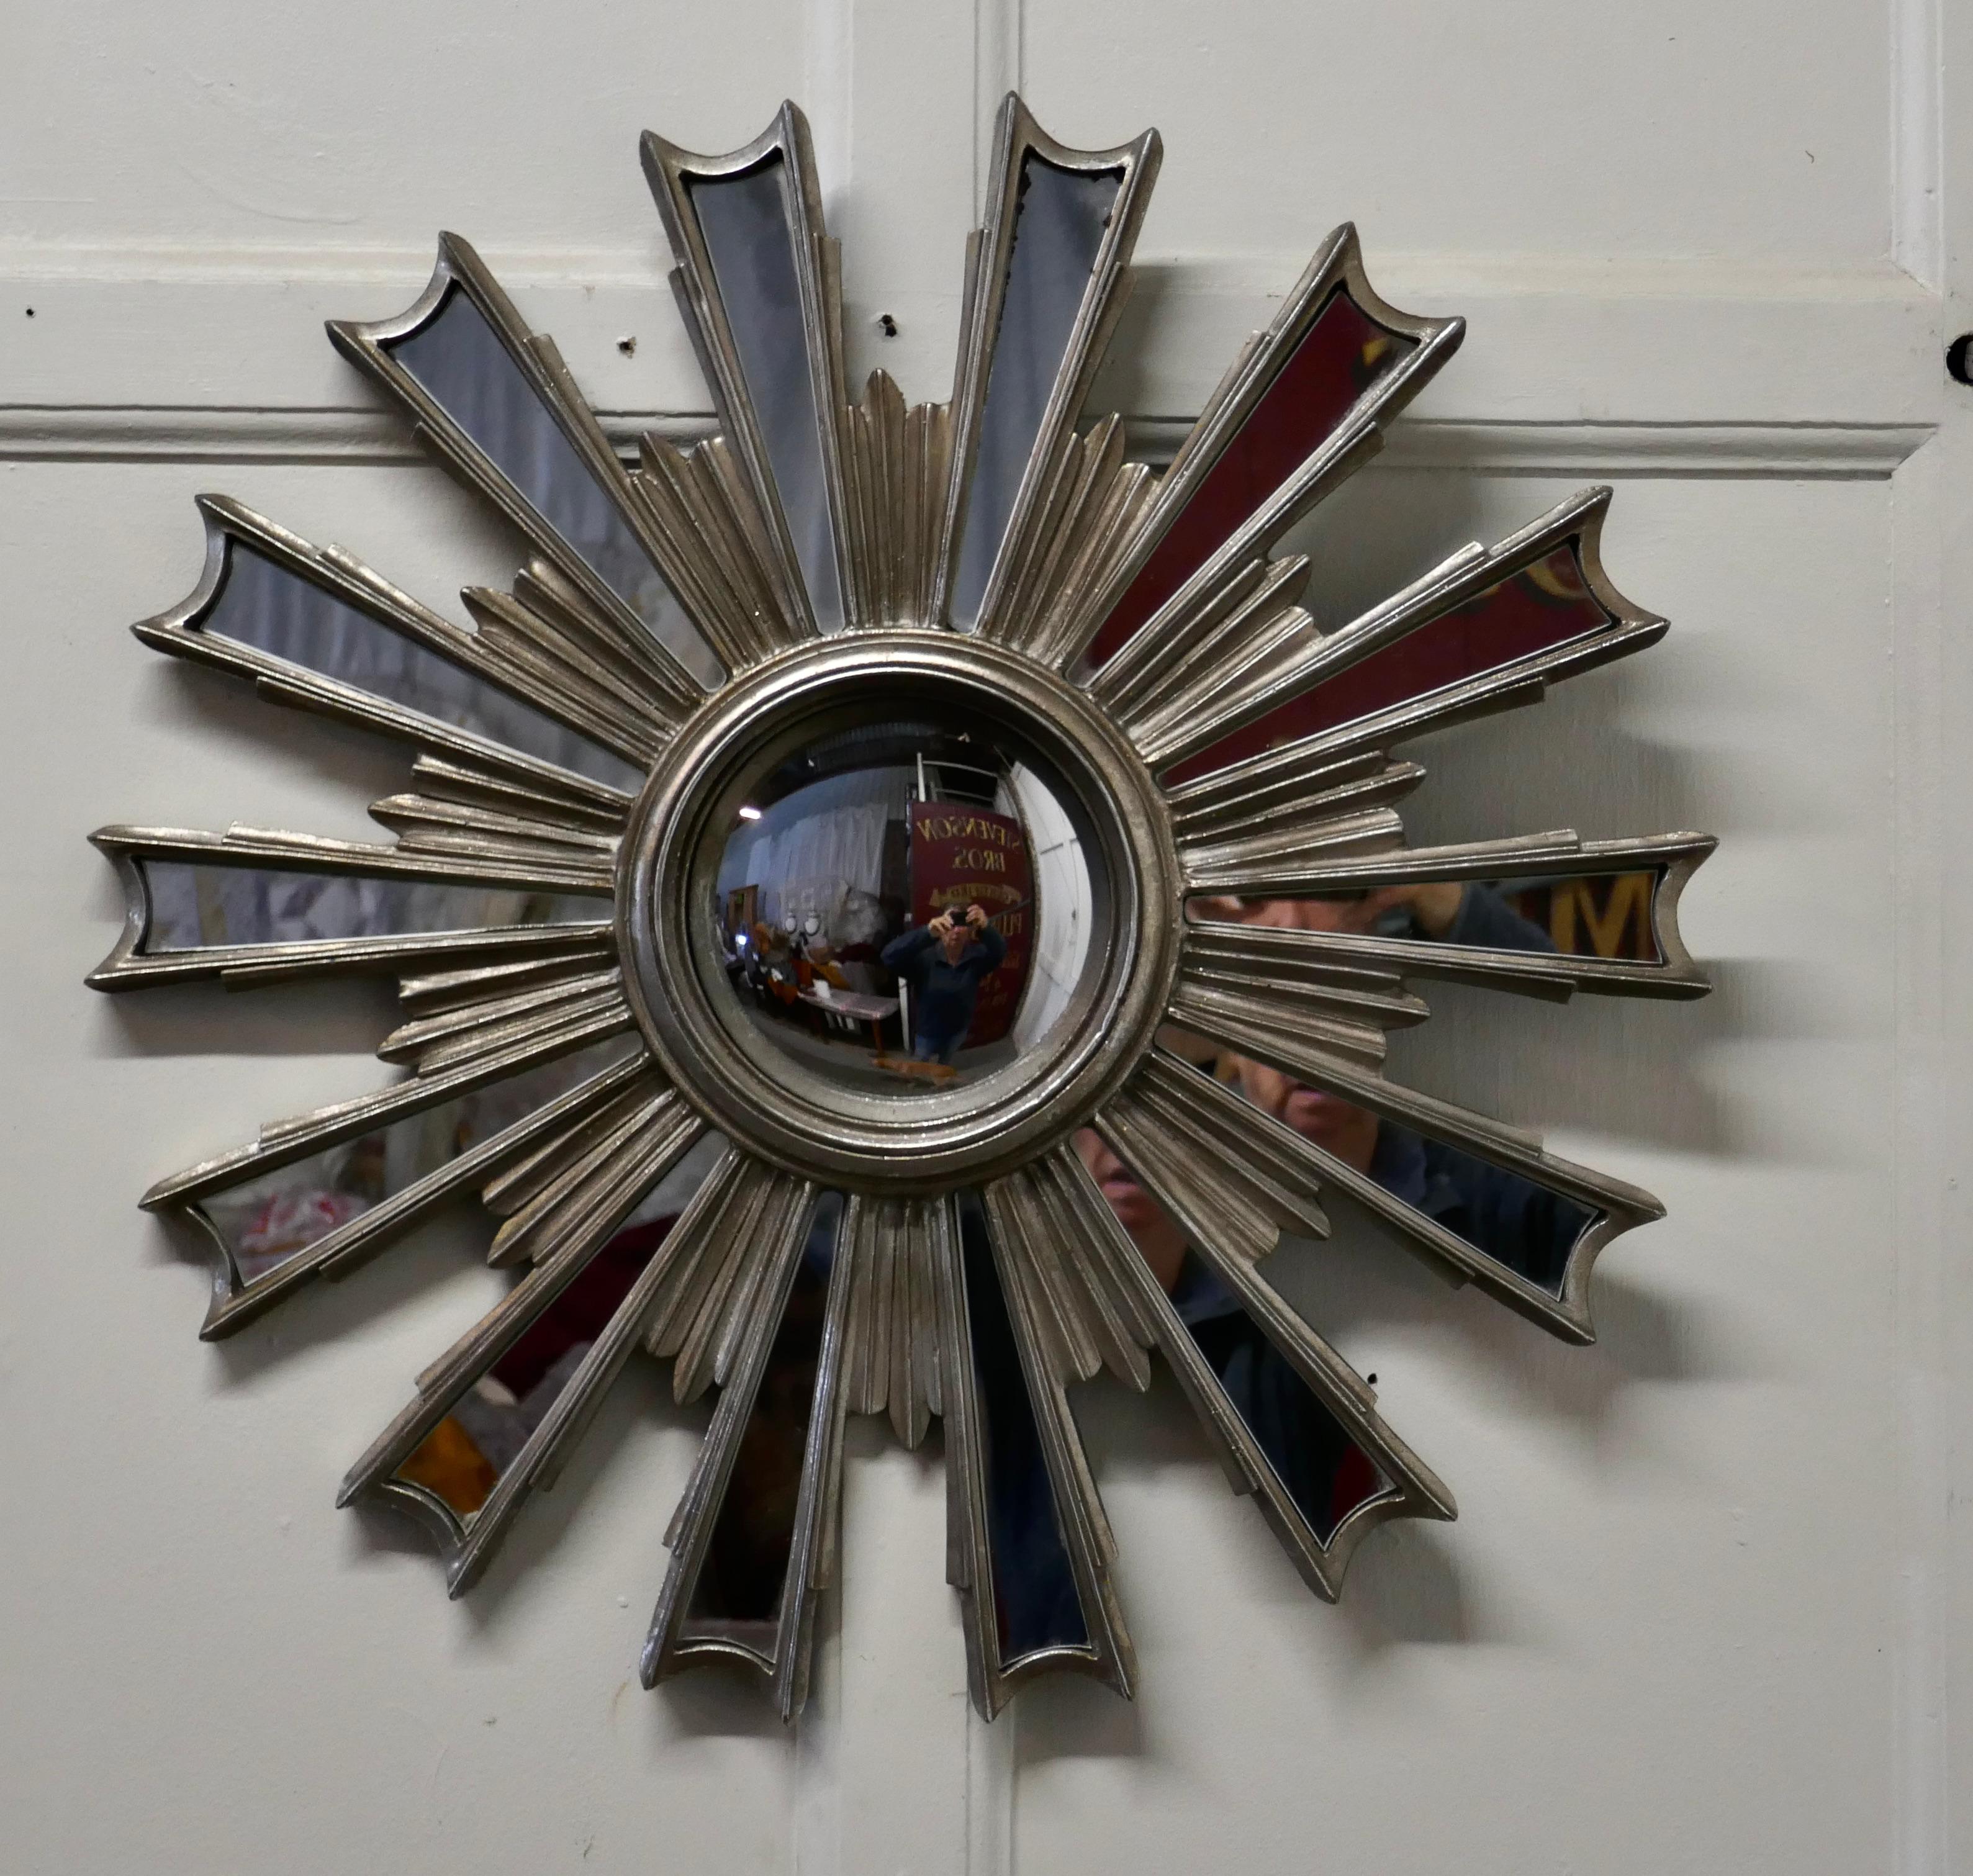 French Retro Sunburst Industrial Look Polished mirror

A Superb stylish piece, the starburst radiates out from the central mirror, the rays are individually mirrored

A Classic from the 20th century, an attractive statement piece
The Starburst